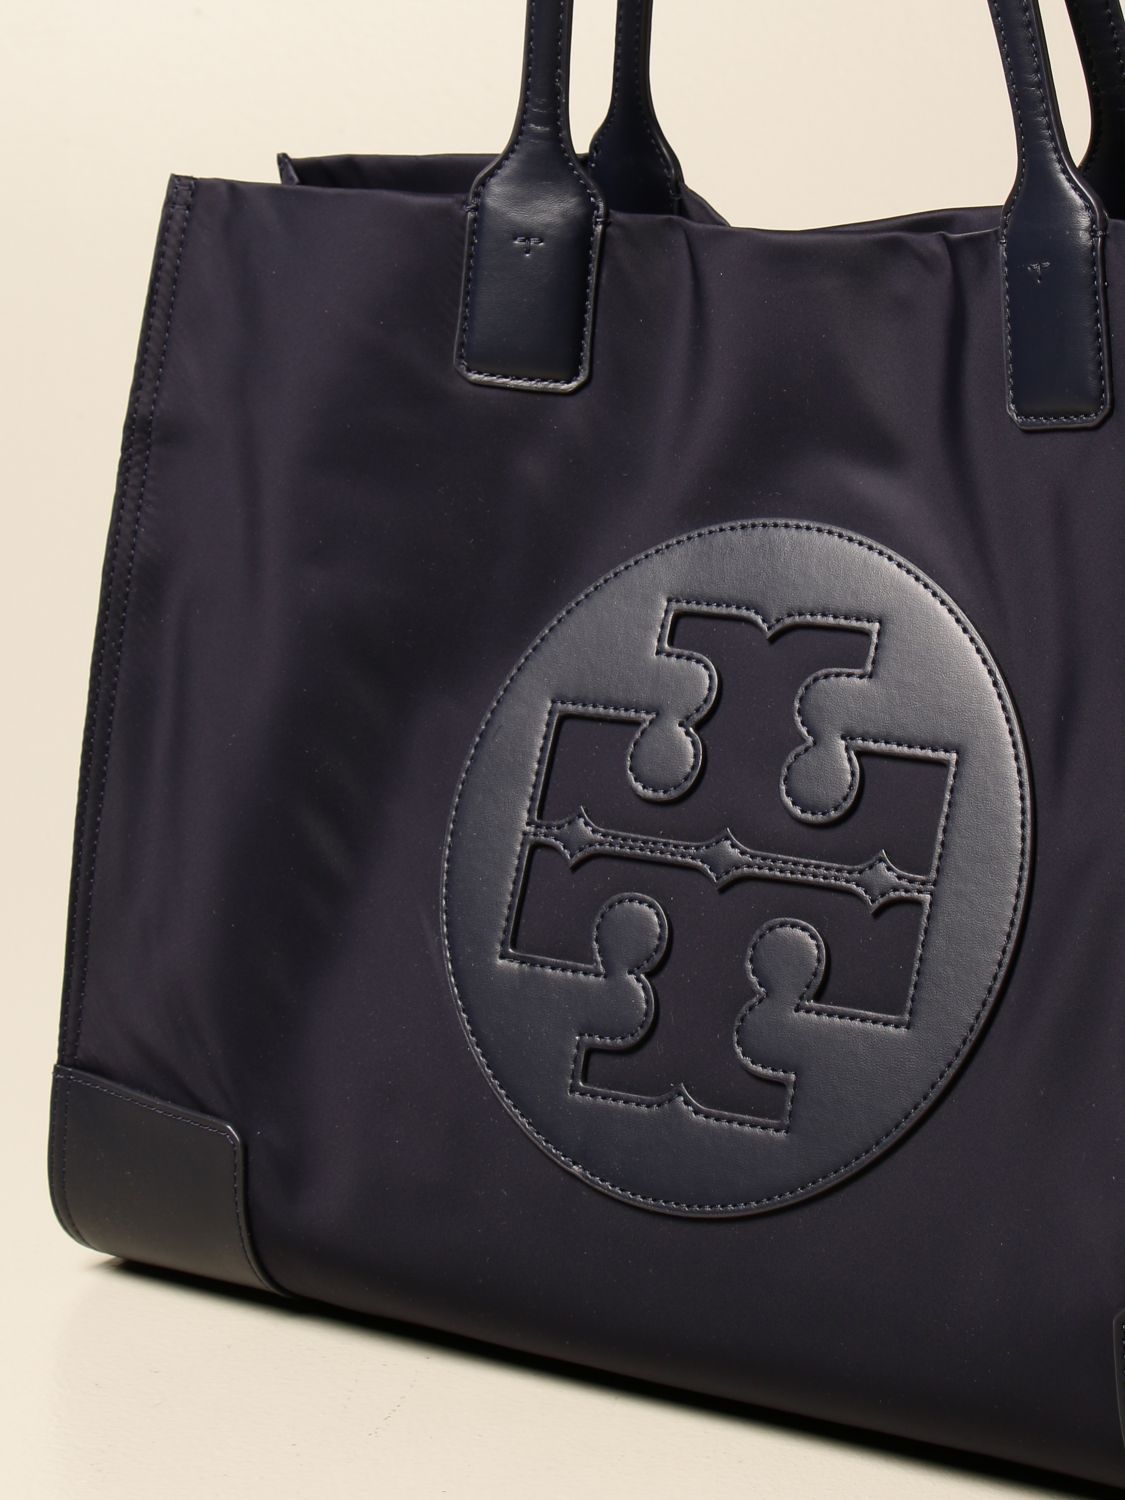 TORY BURCH: Ella Tote nylon bag with emblem - Blue | Tory Burch tote bags  55228 online on 